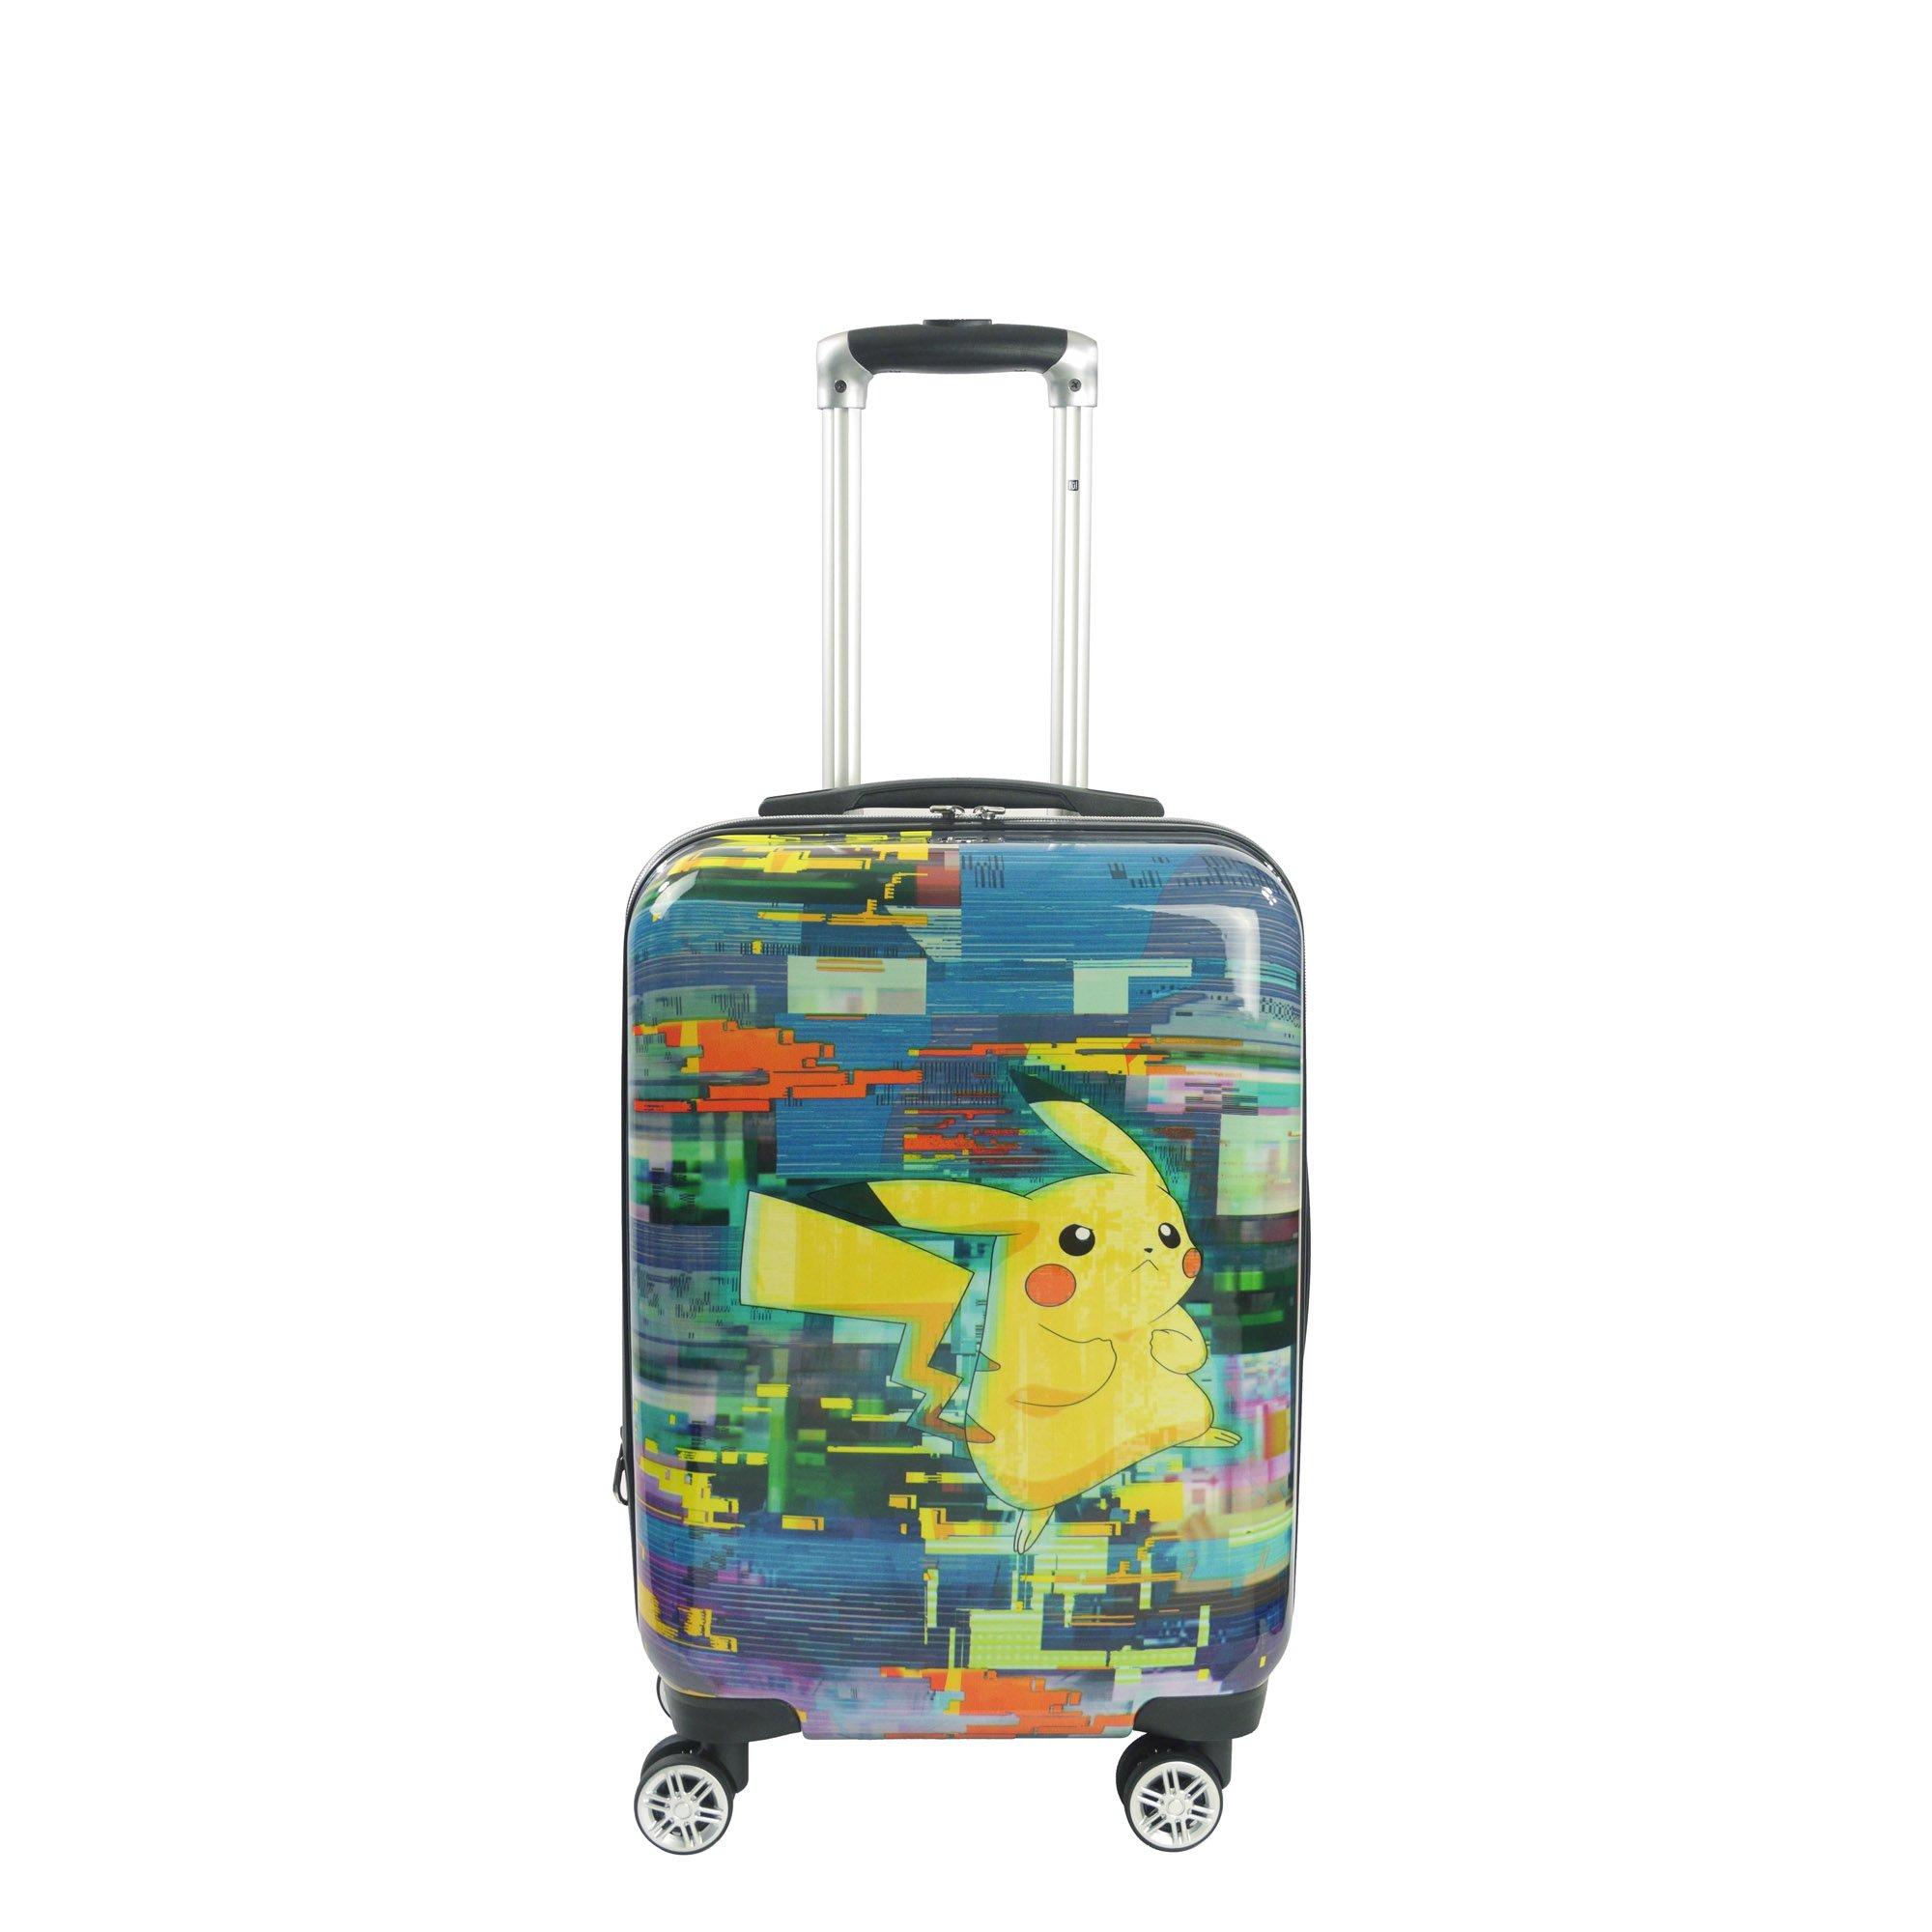 Concept One FUL Pokemon 21-in Hard-Sided Luggage